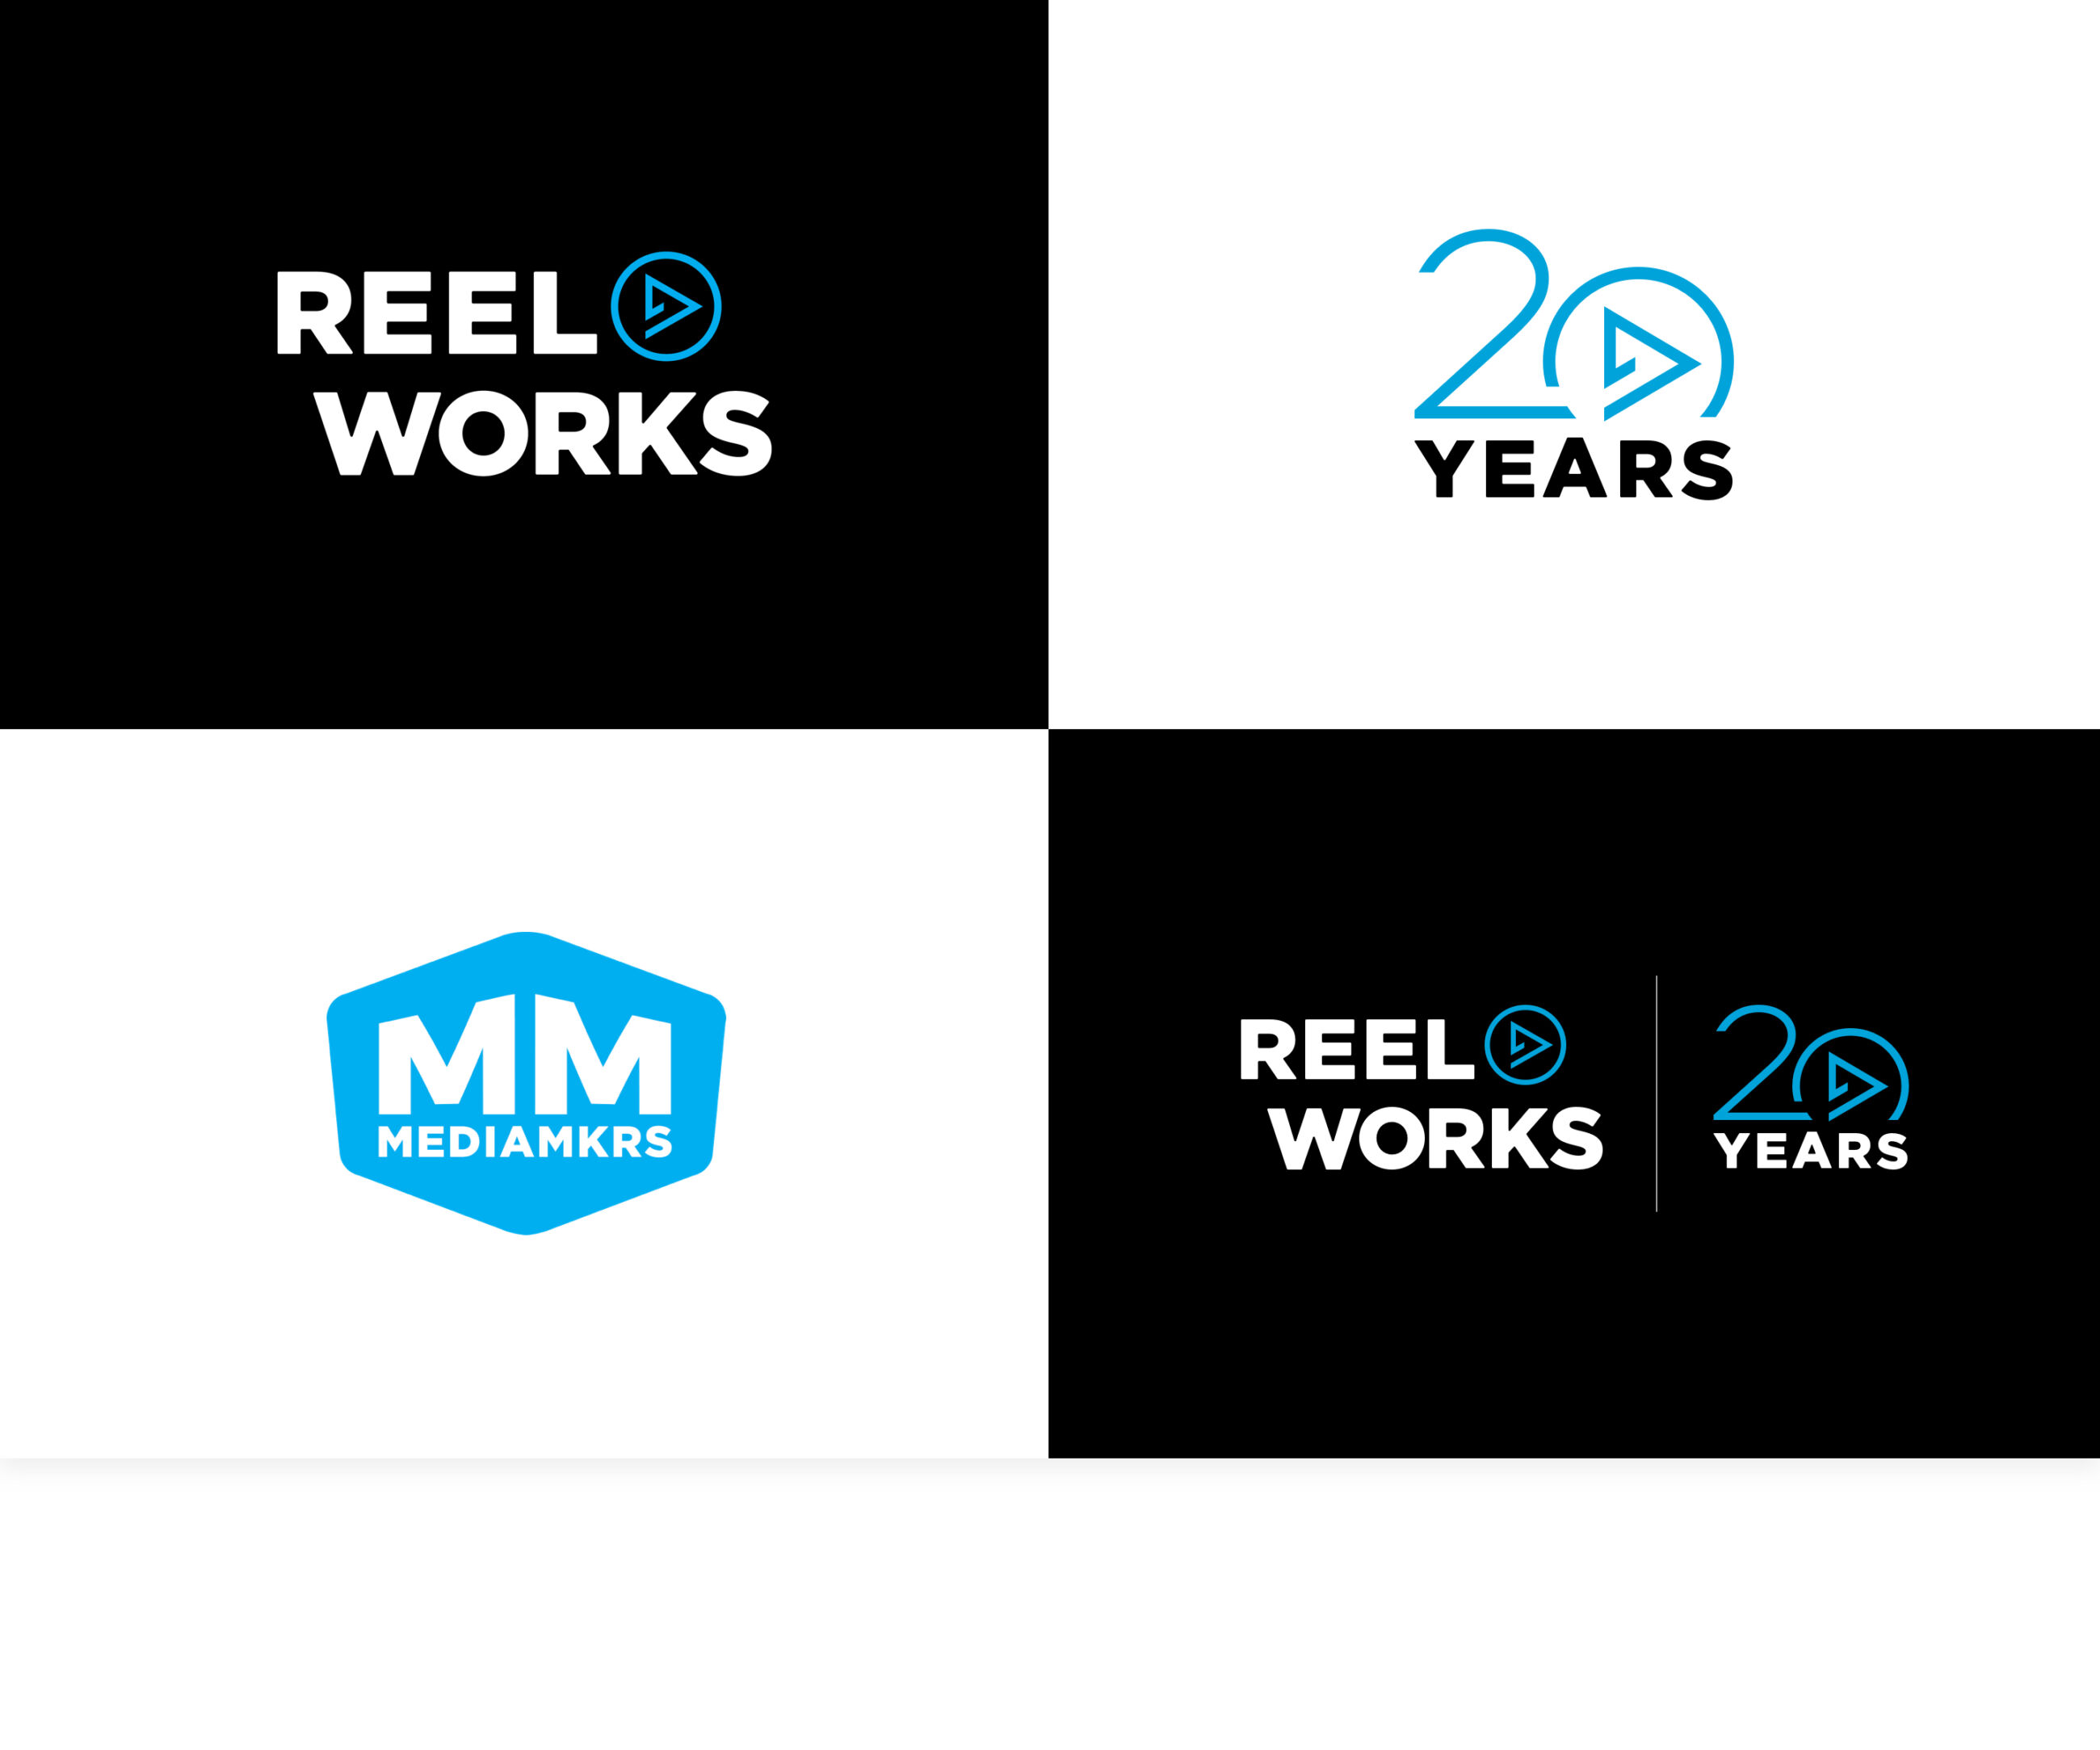 Reel Works logos including organization and 20 year anniversary editions